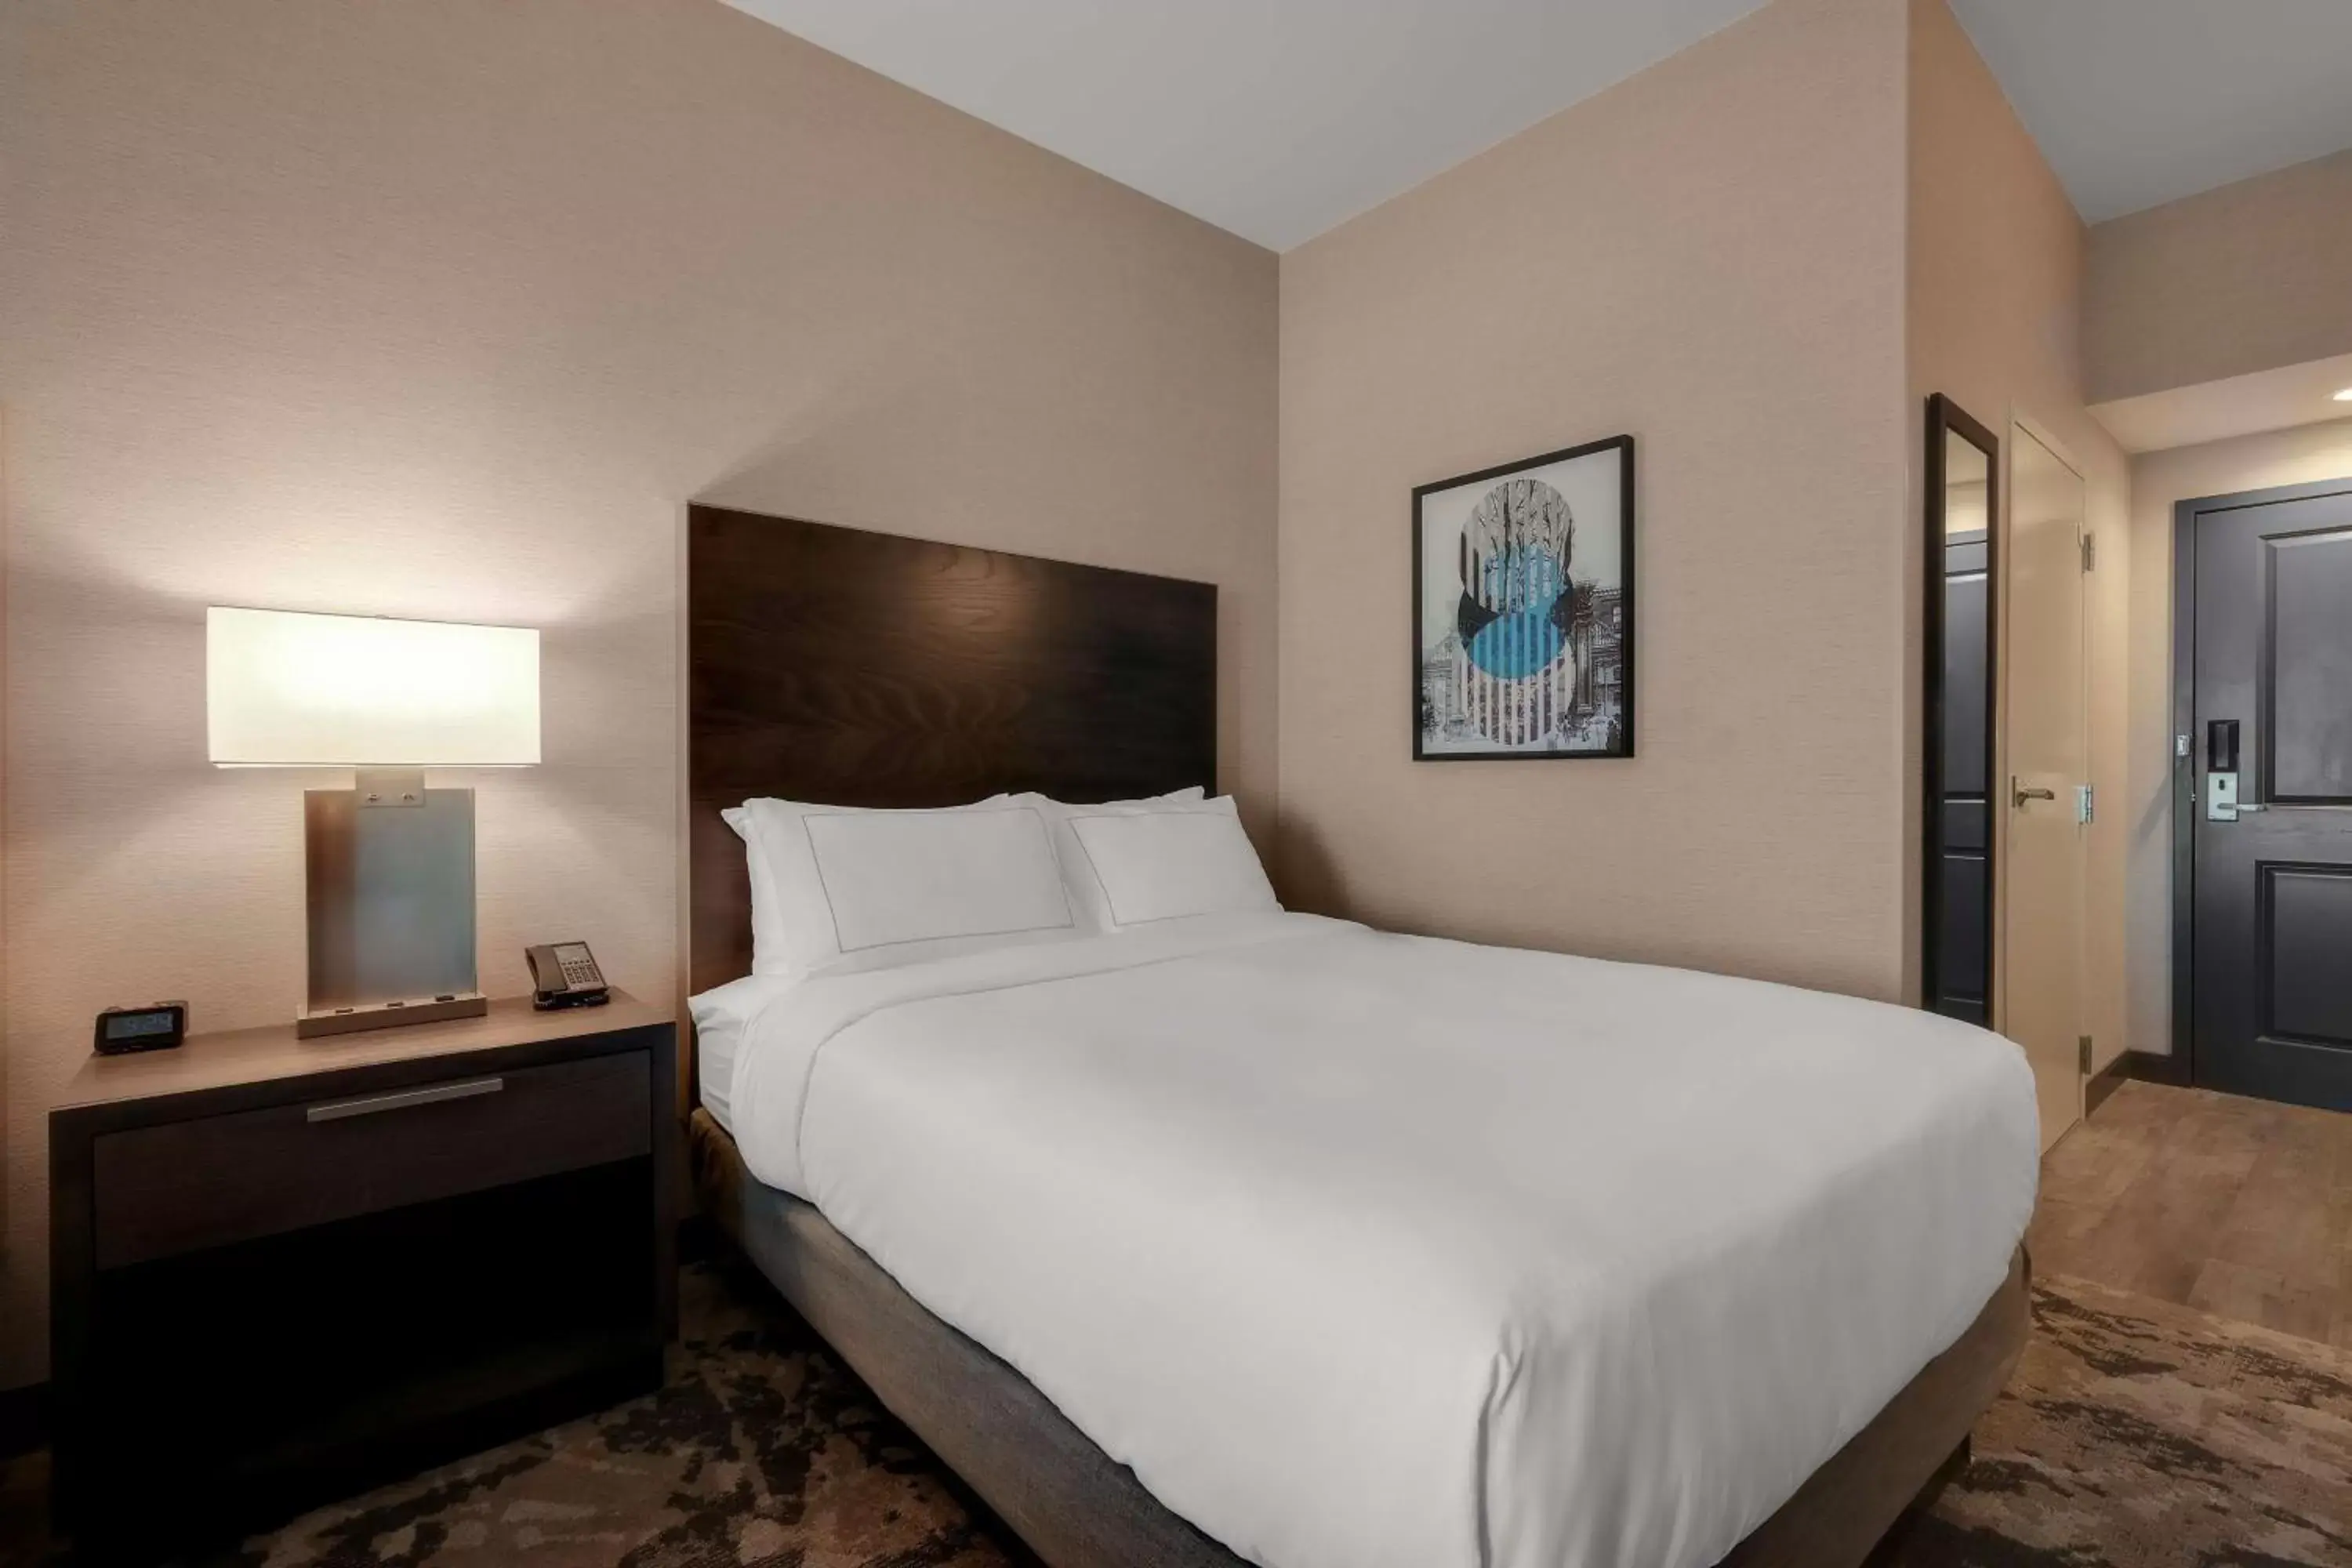 Bed in DoubleTree by Hilton Denver International Airport, CO